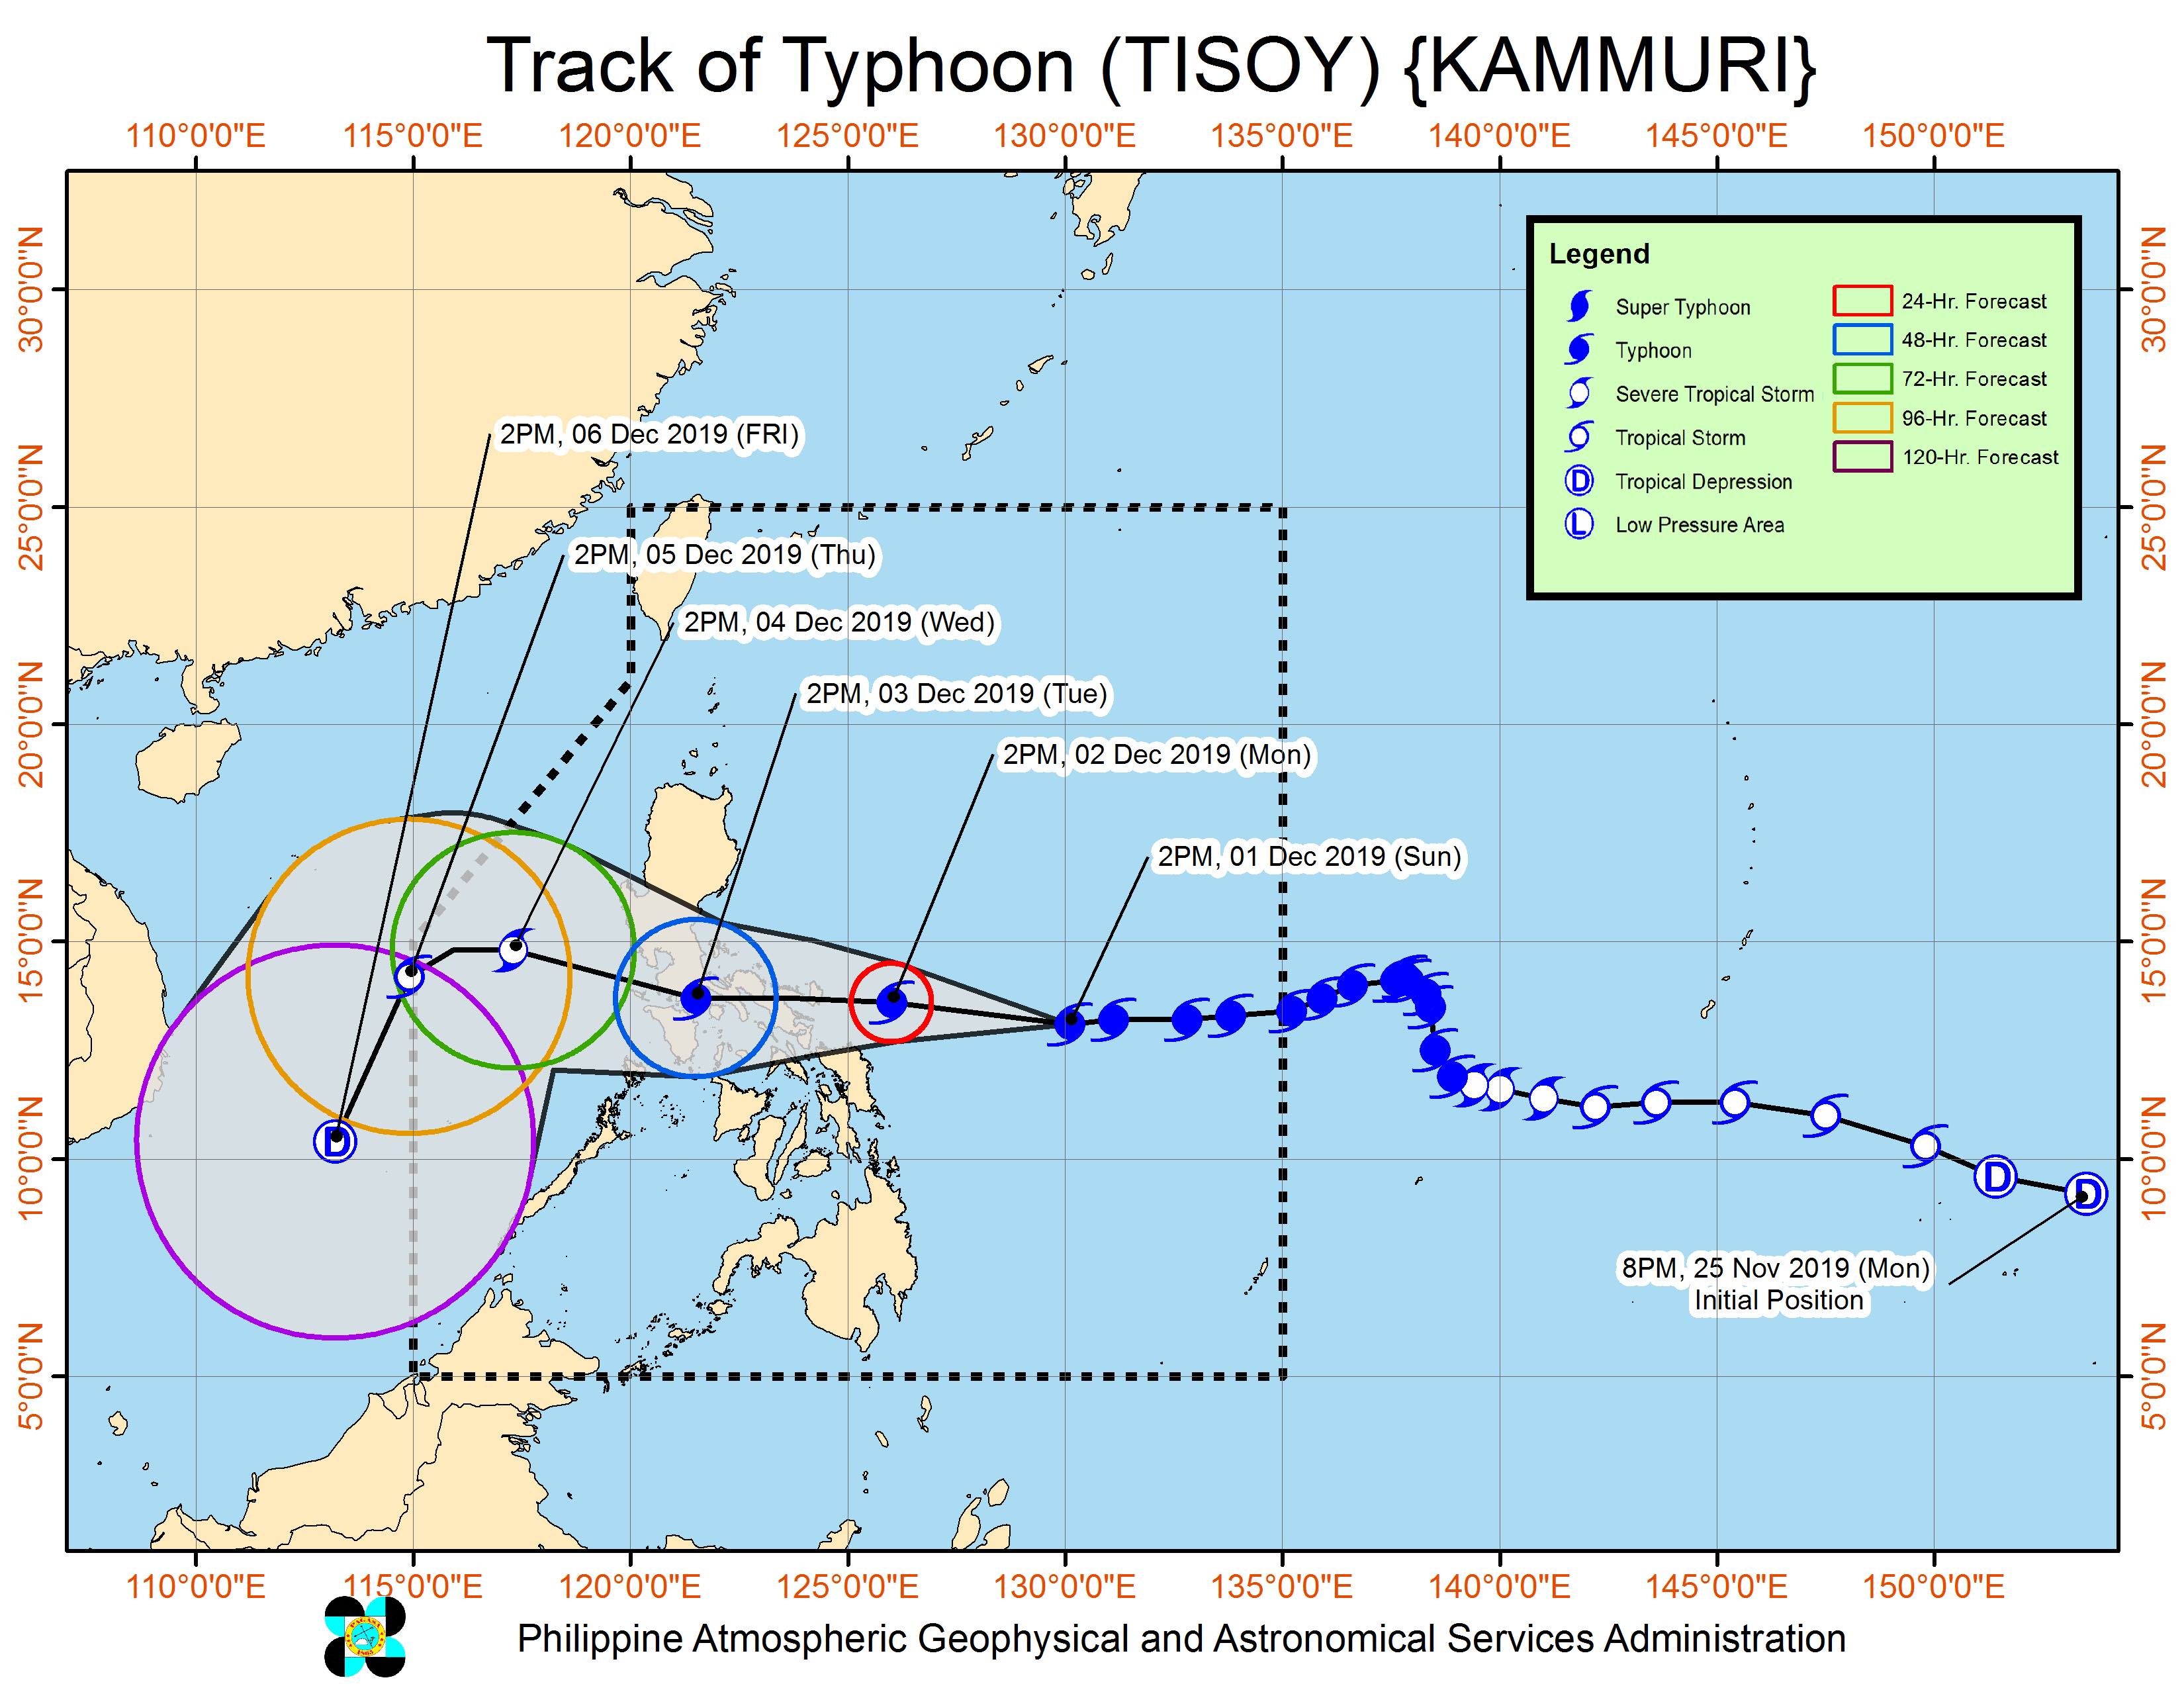 Forecast track of Typhoon Tisoy (Kammuri) as of December 1, 2019, 5 pm. Image from PAGASA 